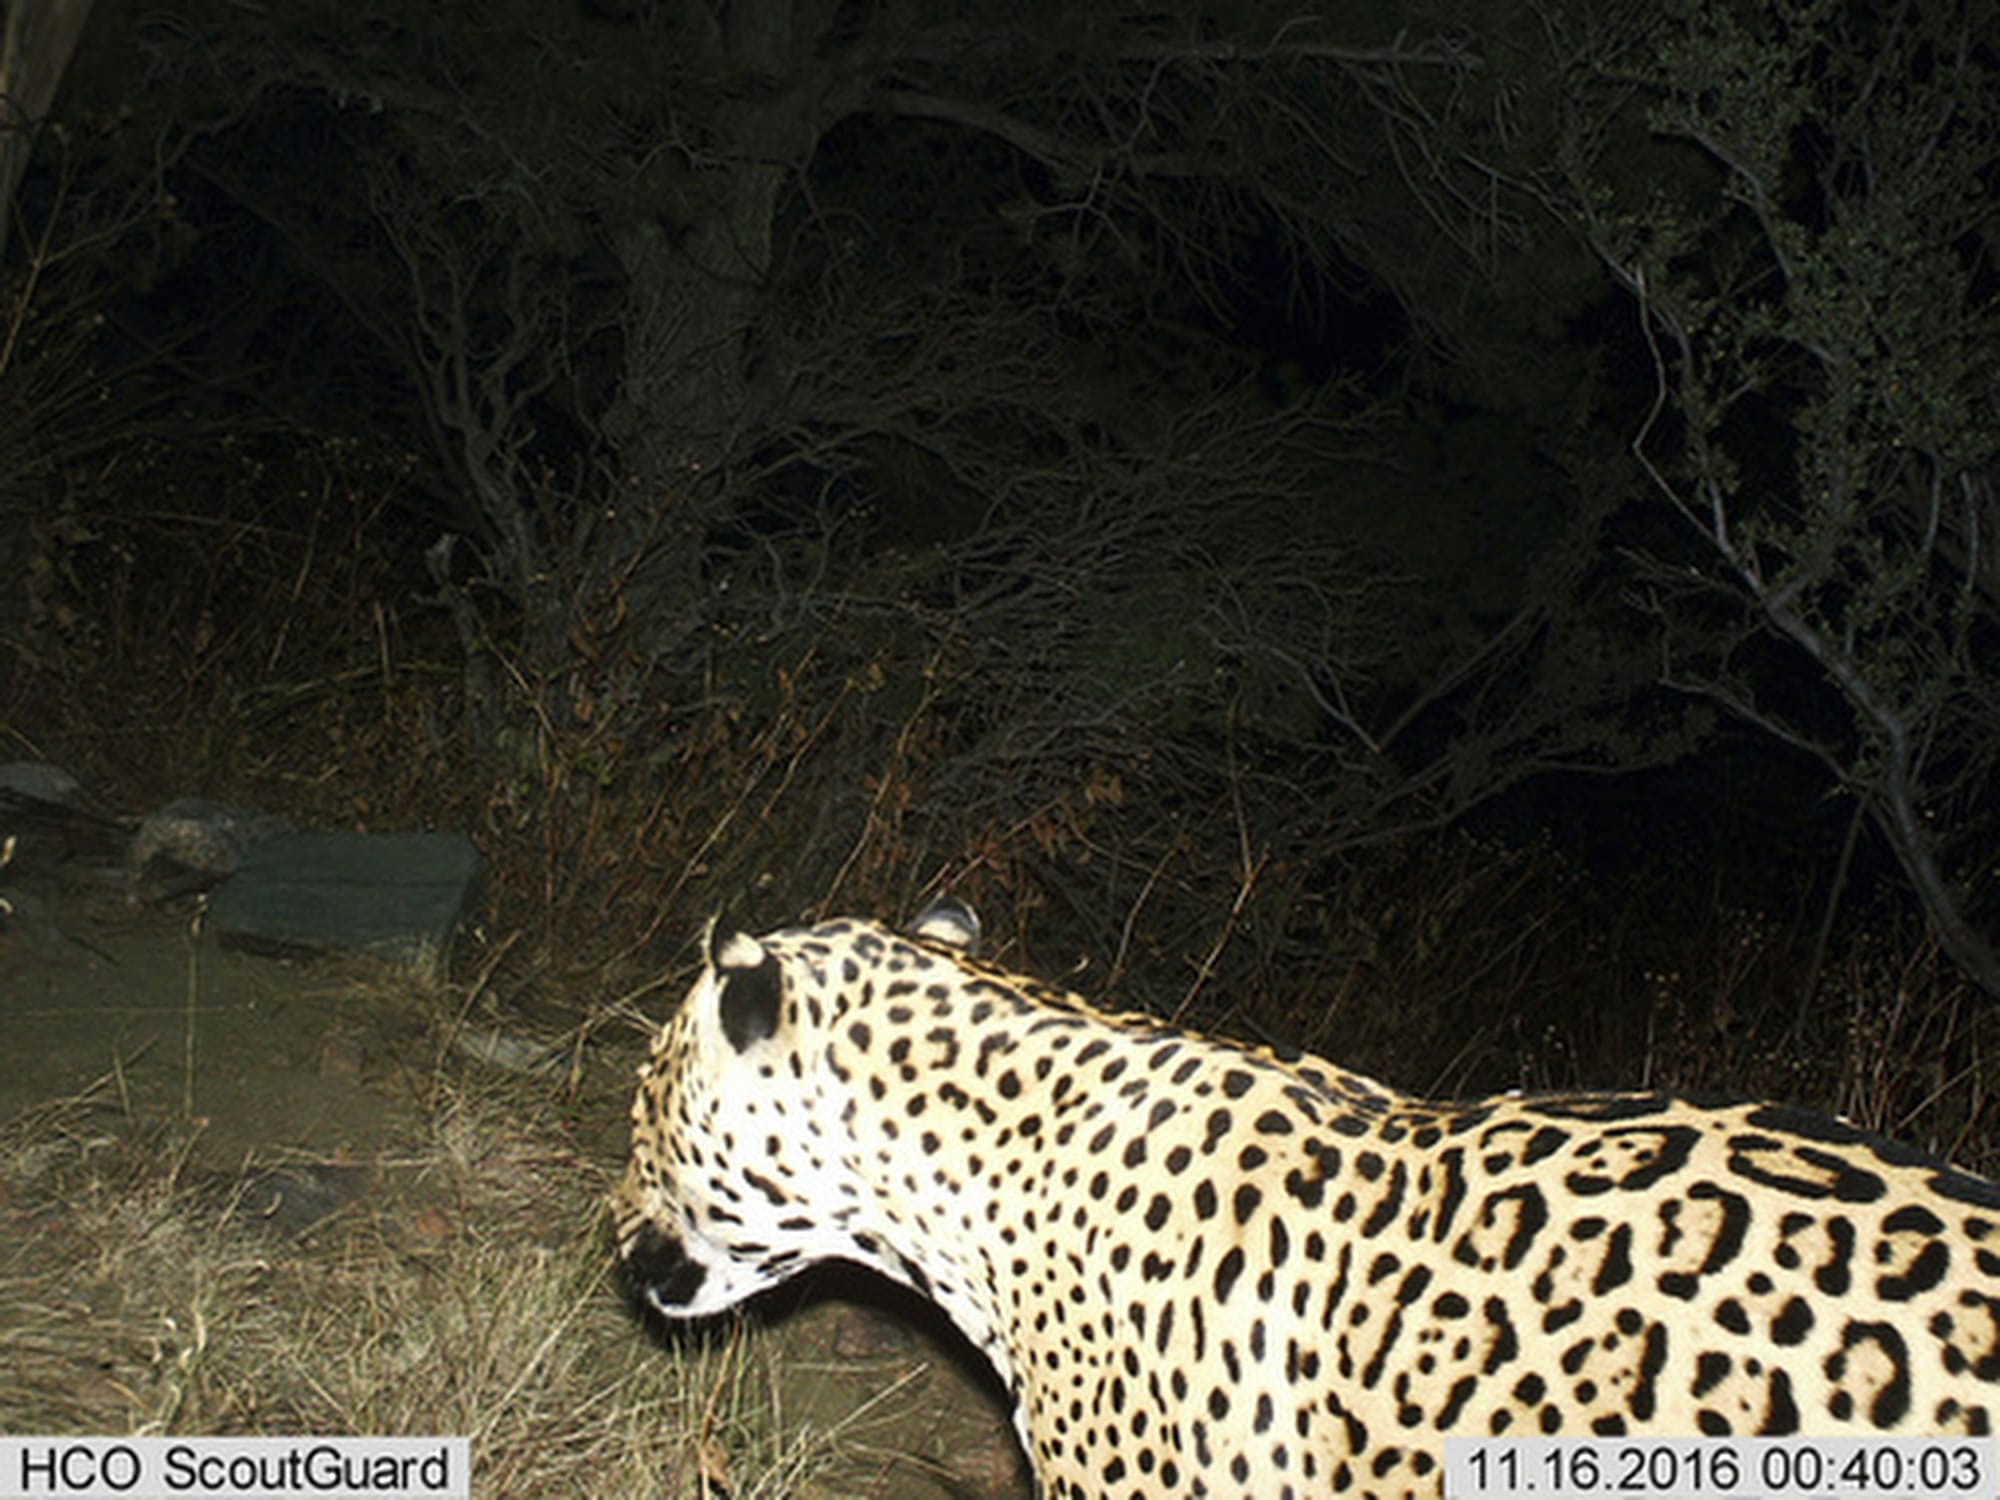 FILE - This Nov. 16, 2016, file photo provided by the U.S. Fish and Wildlife Service shows a Jaguar photographed by a motion-detection camera in the Dos Cabezas Mountains in southern Arizona. The Center for Biological Diversity and U.S. Rep. Raul Grijalva filed what they said is the first federal lawsuit on Wednesday, April 12, 2017, in Tucson against the proposed border wall. Wildlife conservationists said the wall would be detrimental to rare animals such as jaguars and ocelots that are known to traverse the international line. (Bureau of Land Management/U.S.